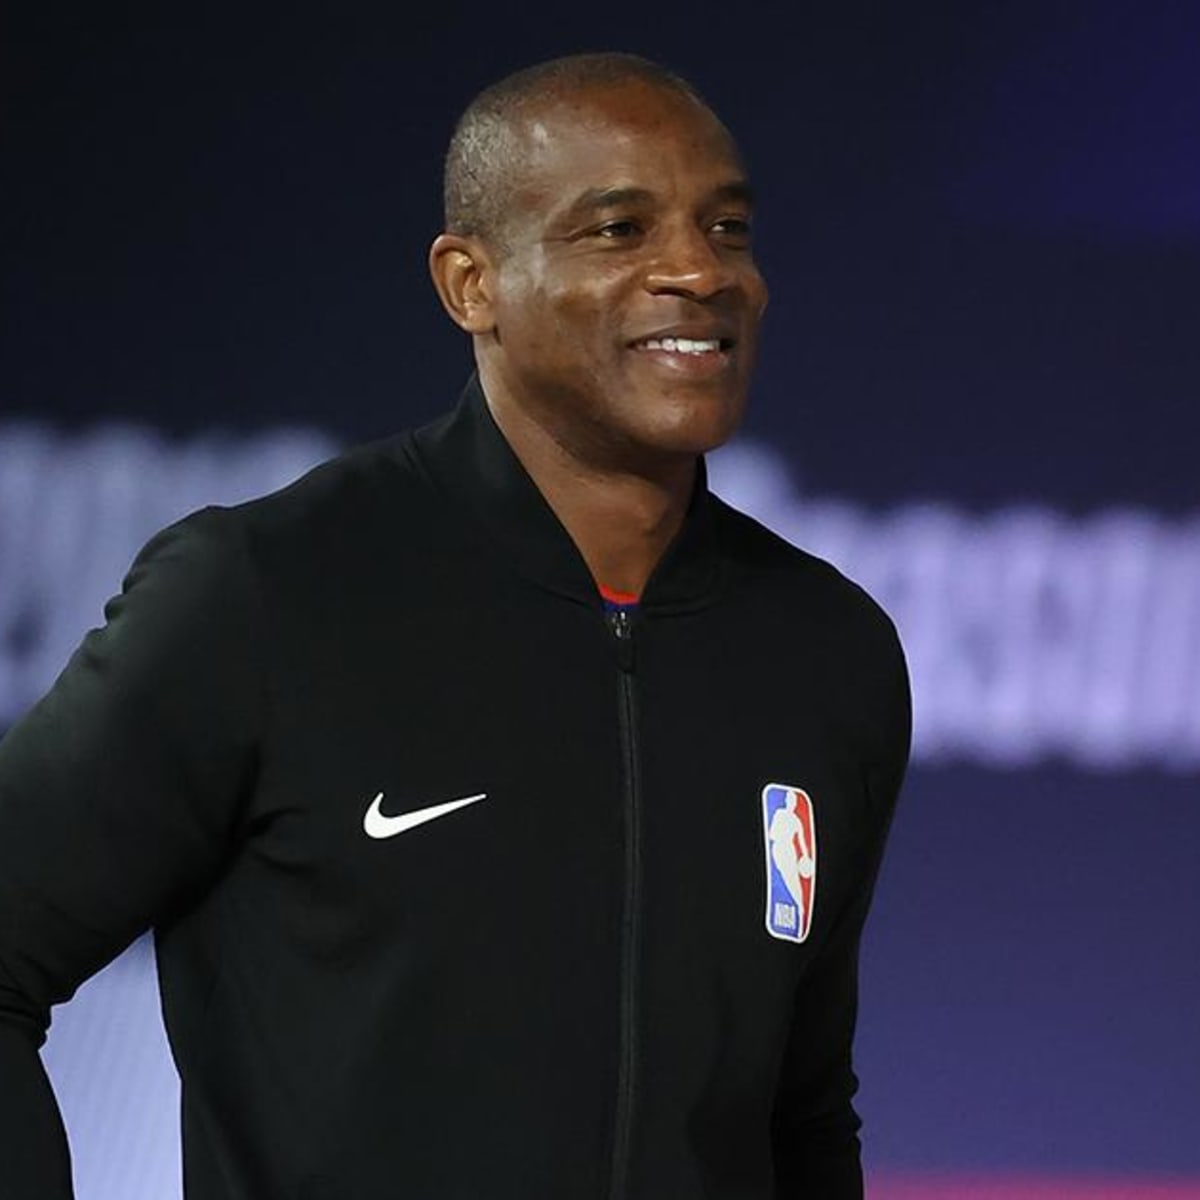 Tony Brown, referee who worked NBA Finals, dies at 55